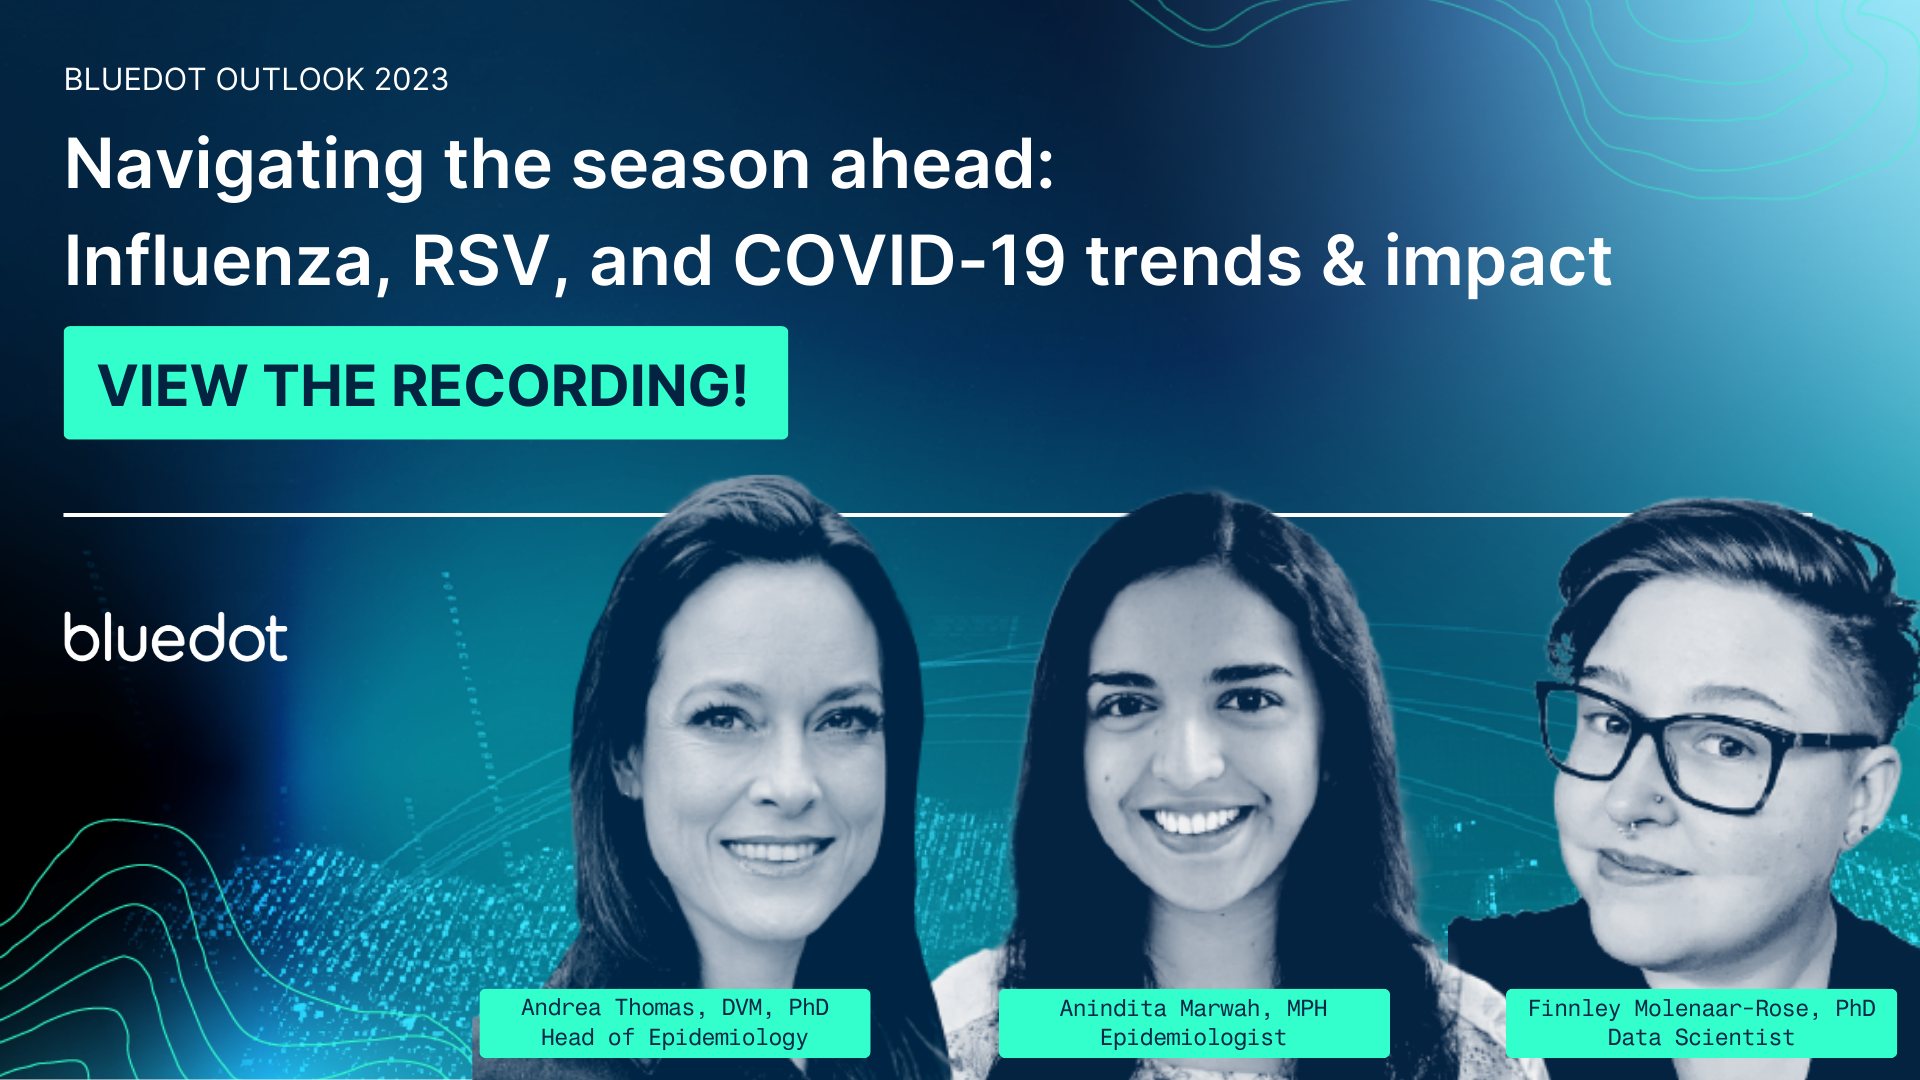 access the recording Influenza, RSV, and COVID-19 trends & impact for 2023